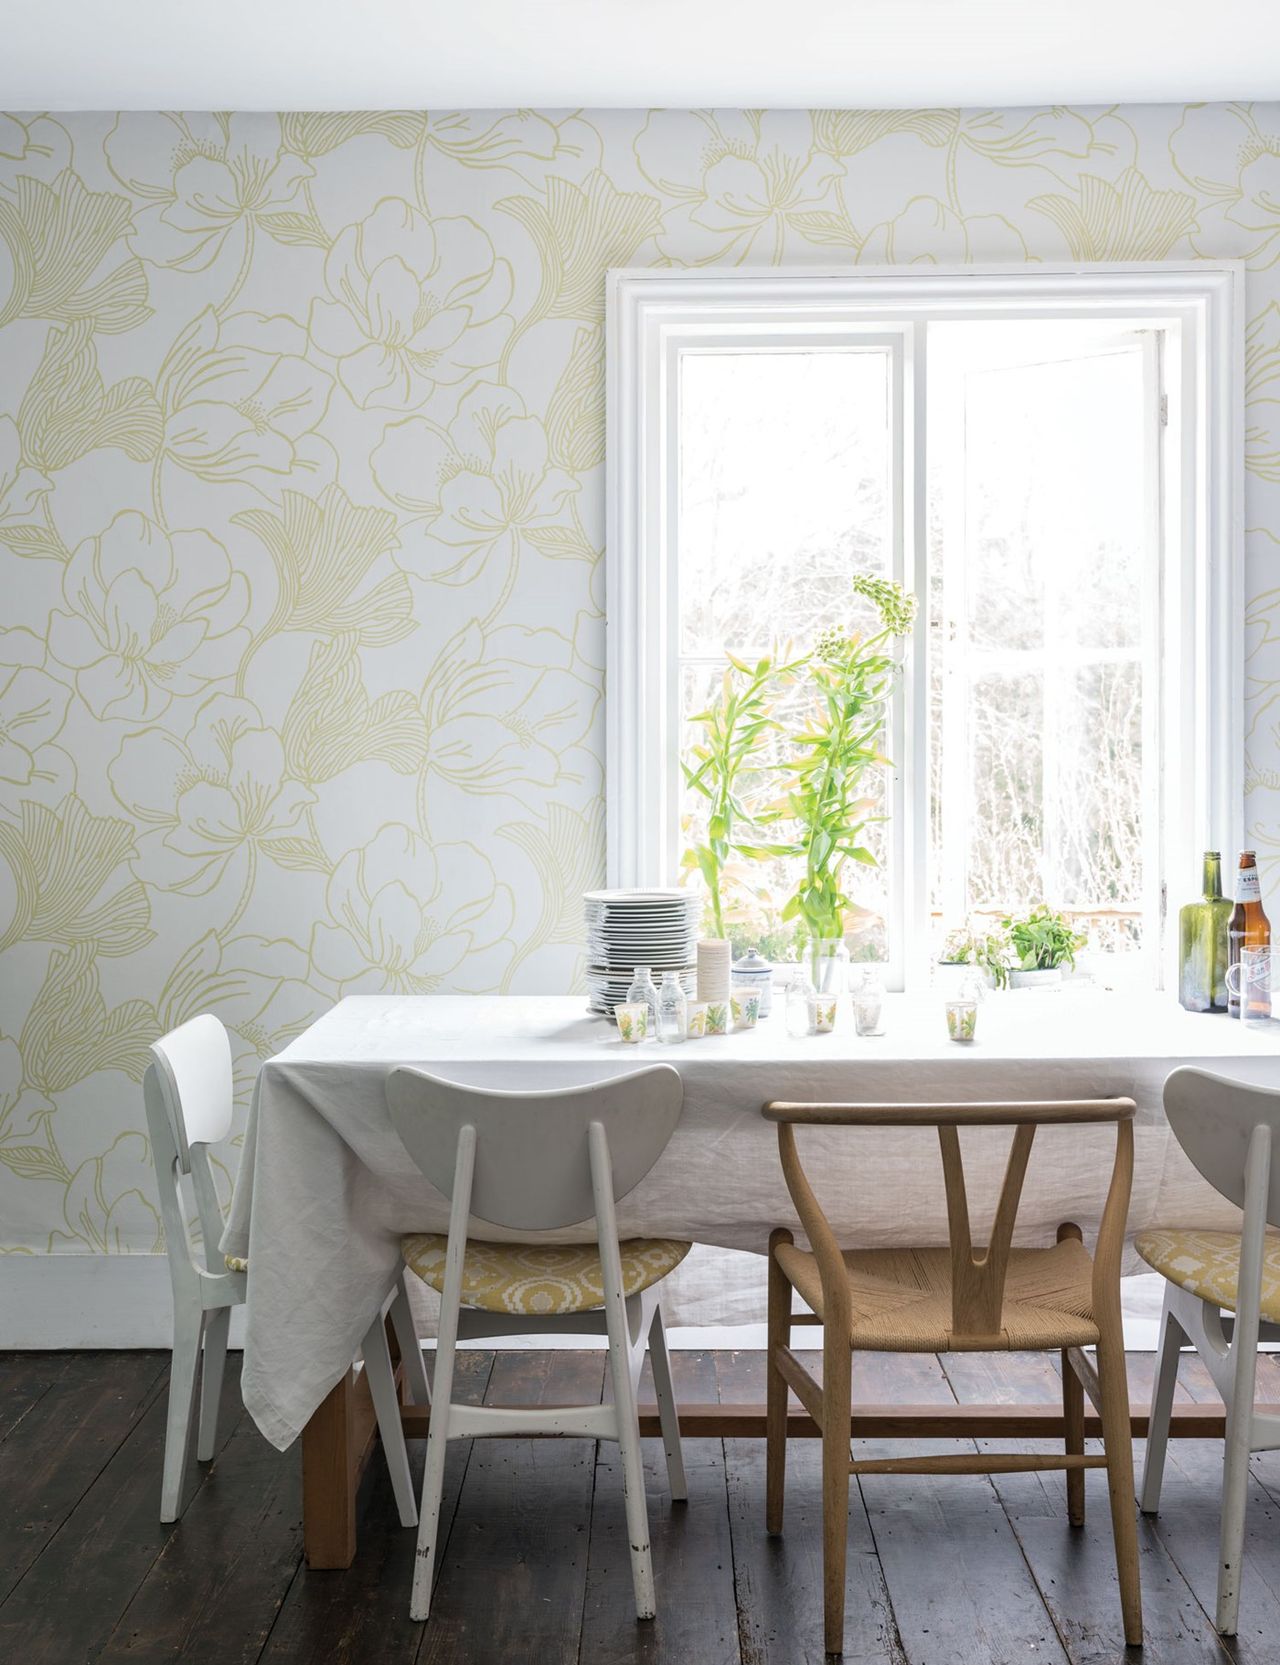 10 dining room wallpaper ideas – modern murals, quirky prints and